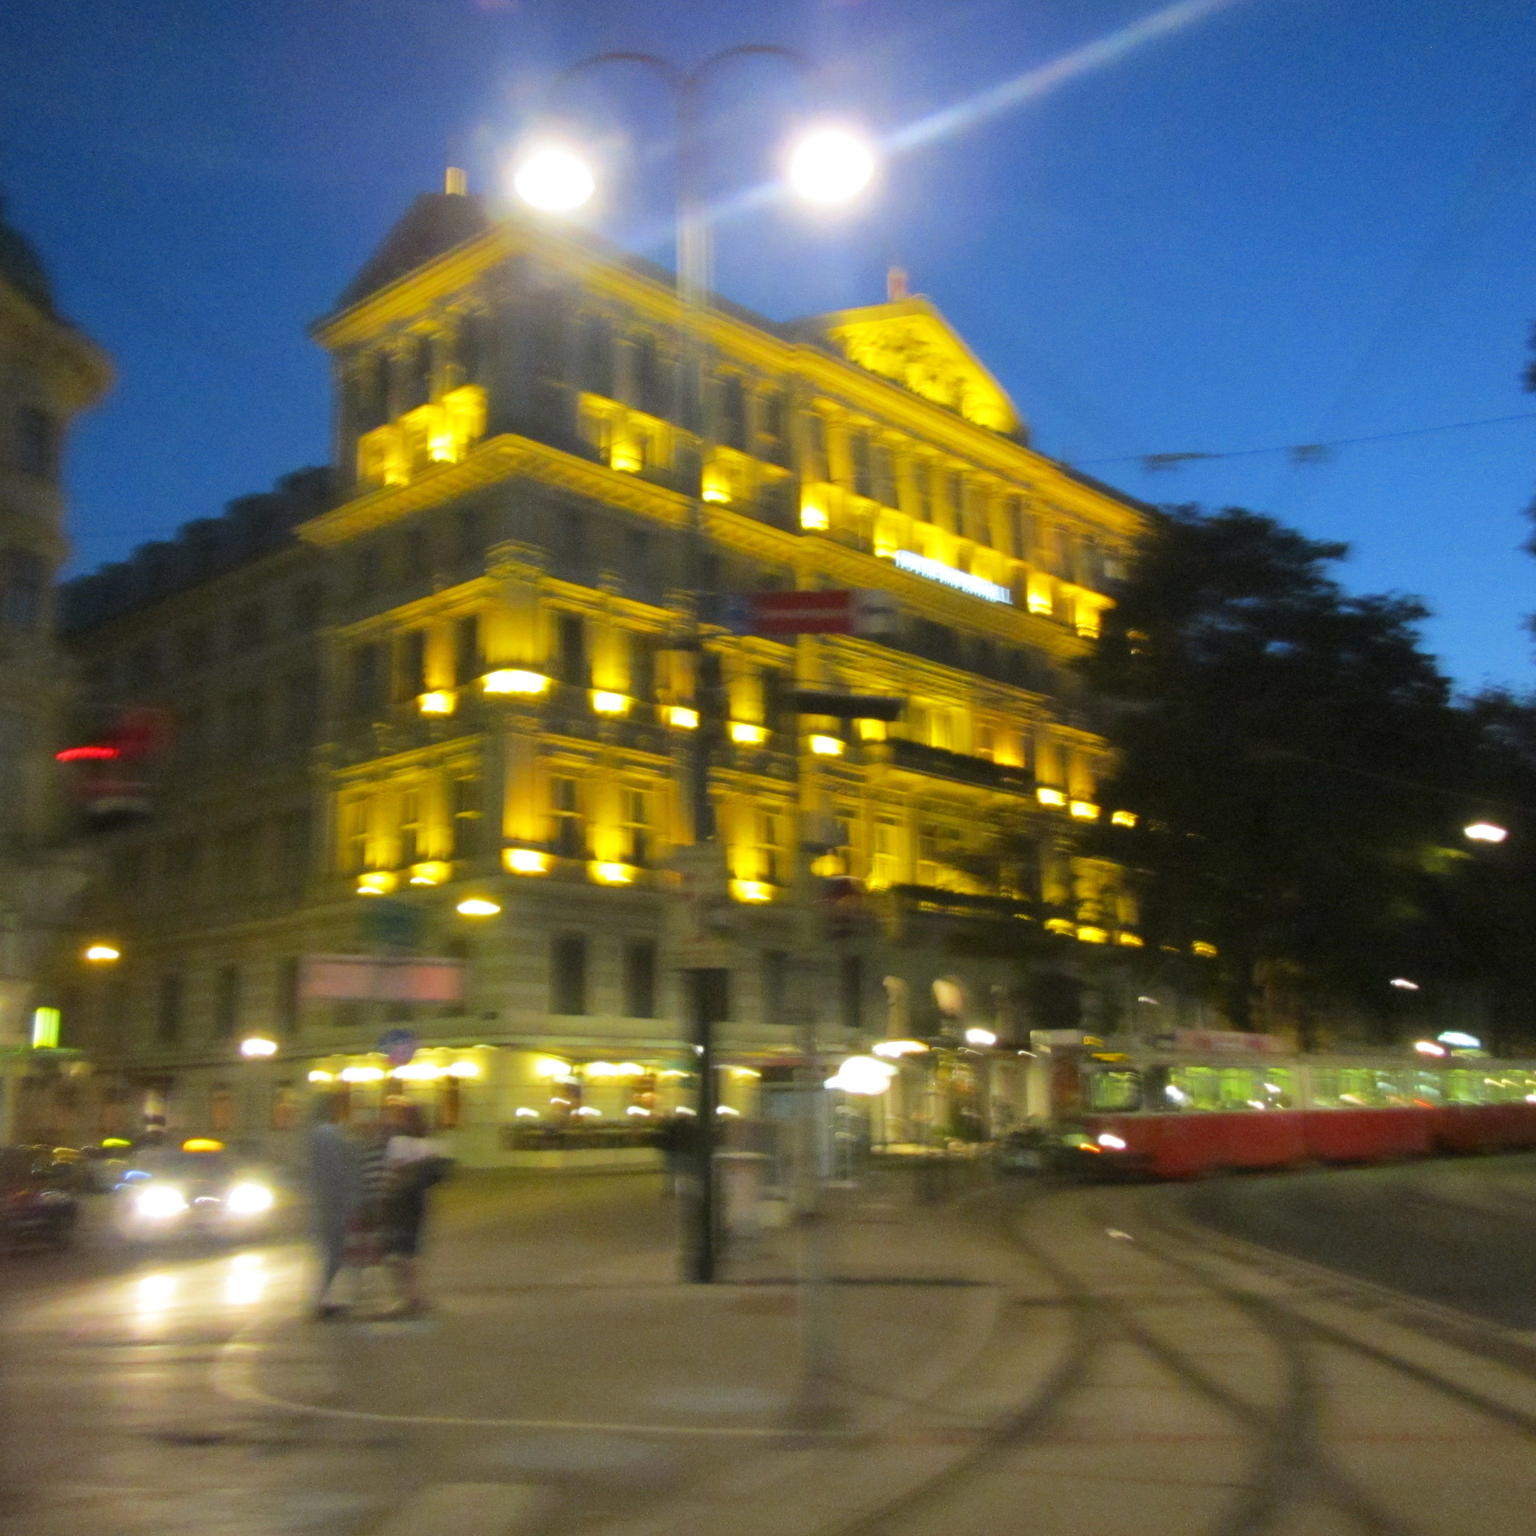 Carriage Ride to Mozart Concert Hall